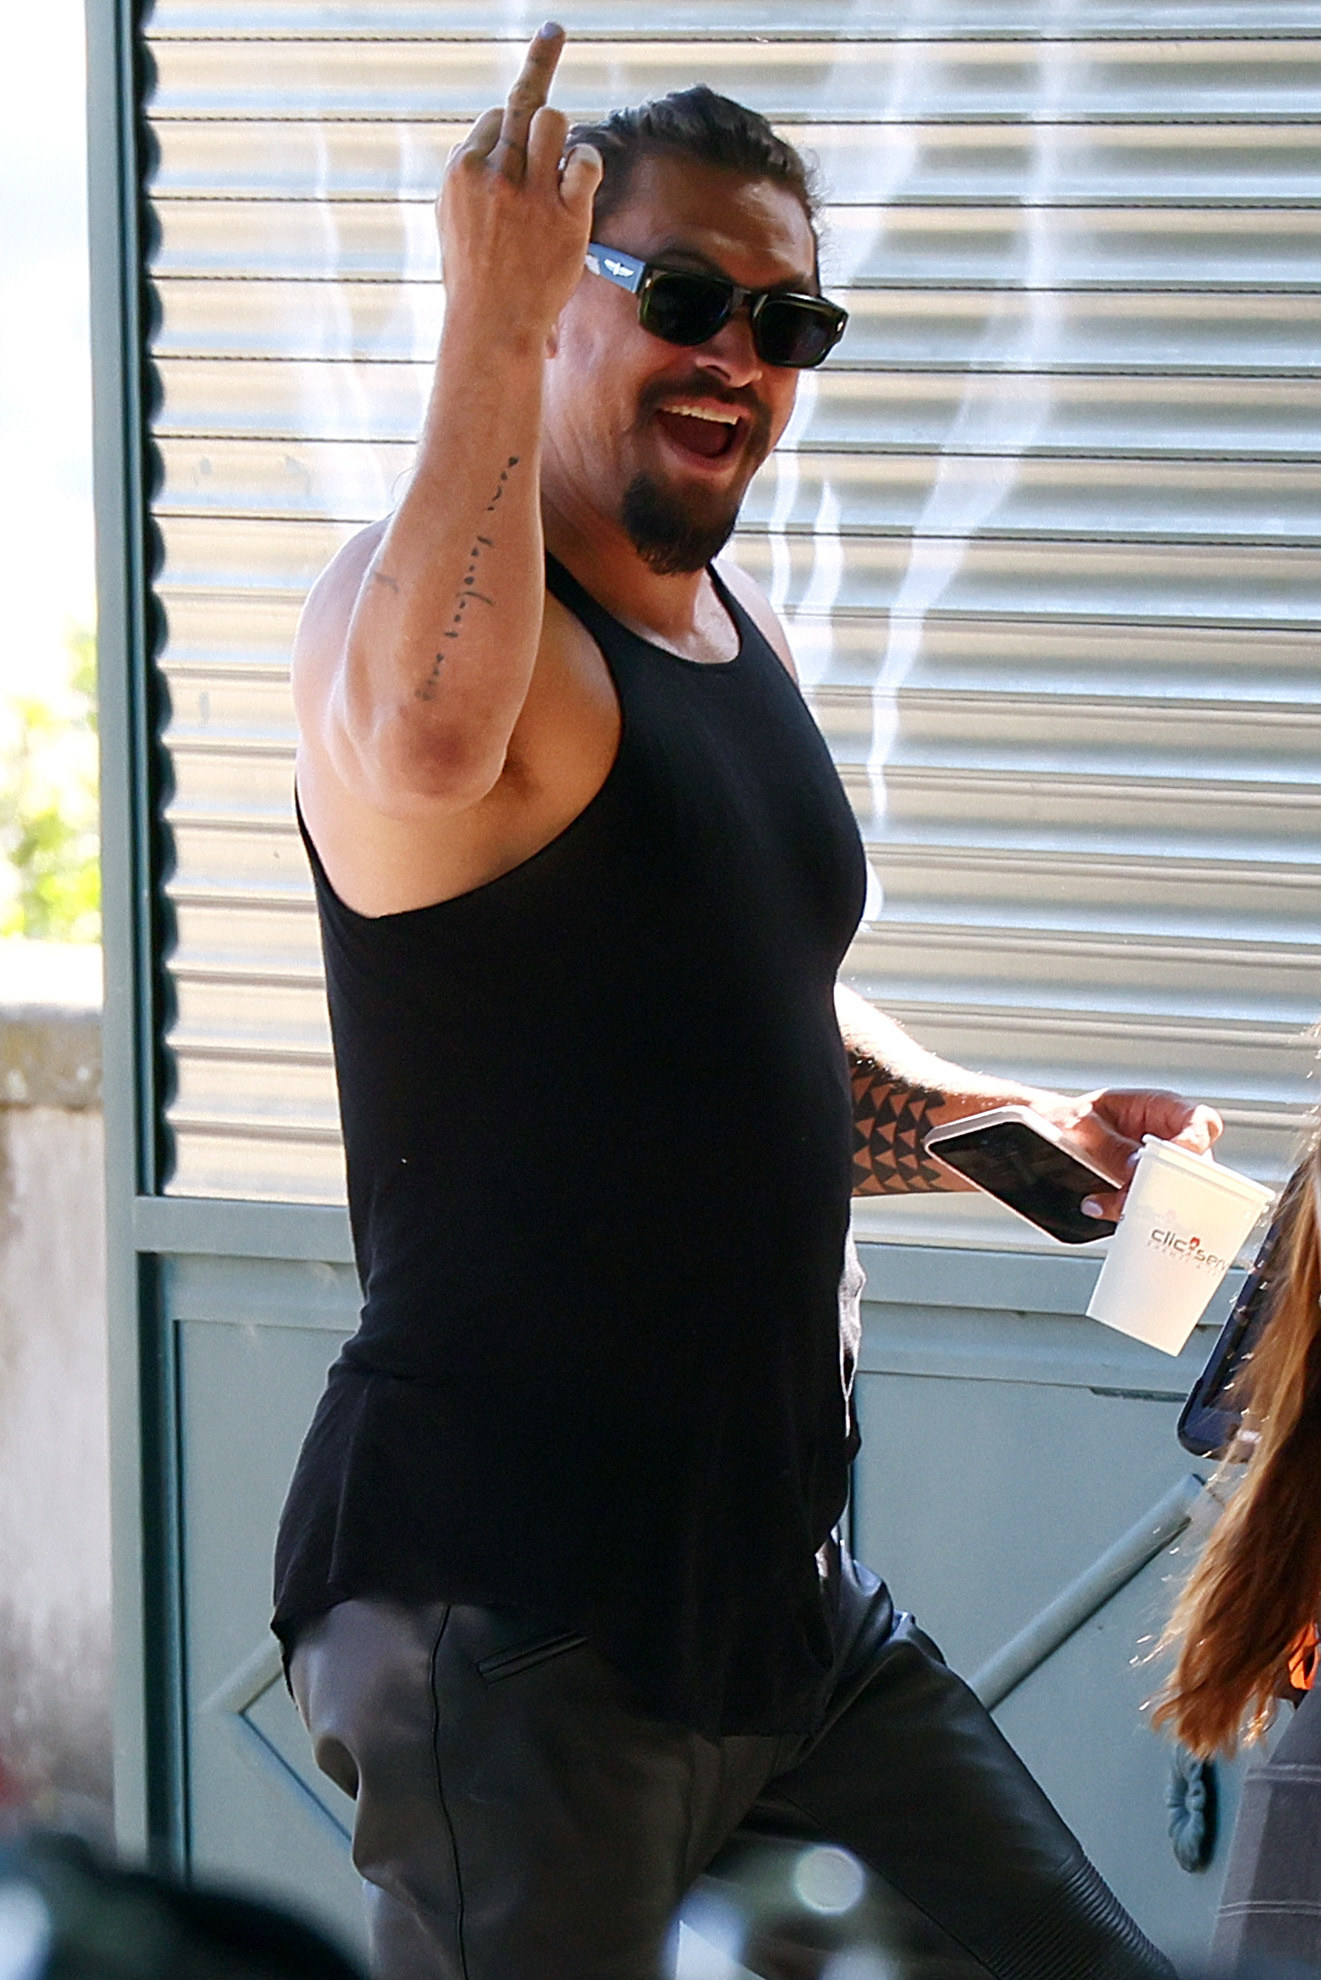 Smiling in a muscle shirt and sunglasses and middle finger raised